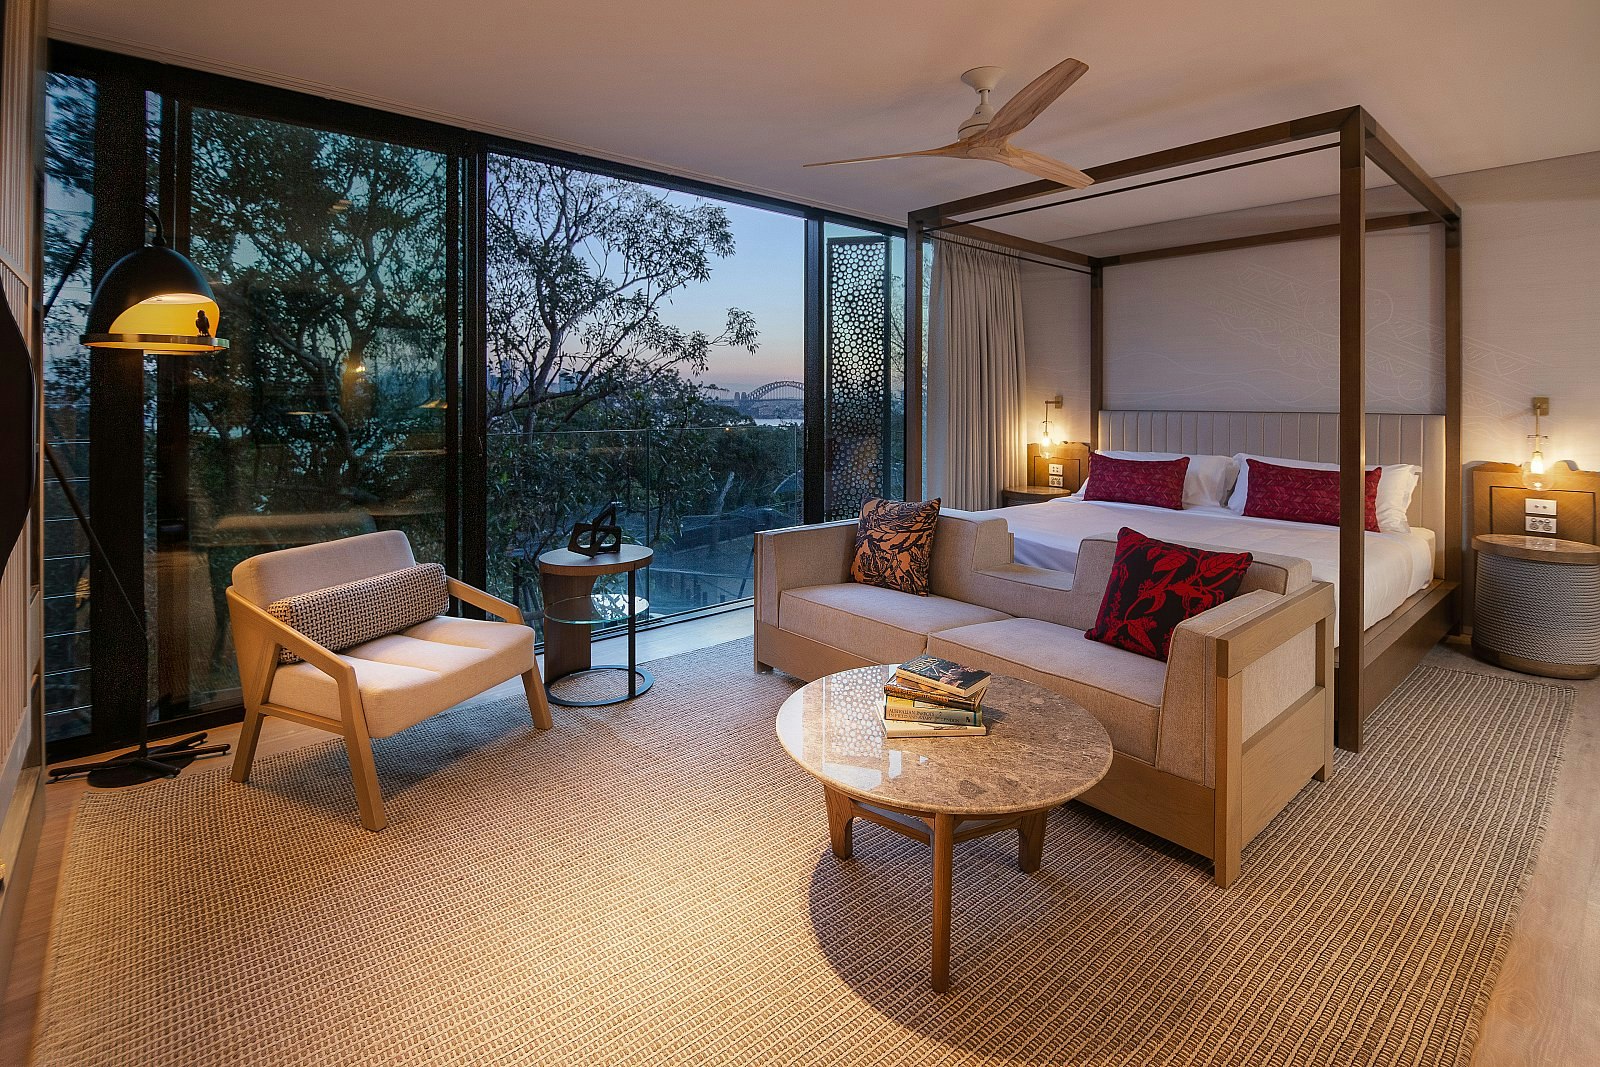 A large suite at the Taronga Zoo Wildlife Retreat with a four poster bed and modern furnishings; the window looks over trees with Sydney Harbour Bridge visible in the distance.